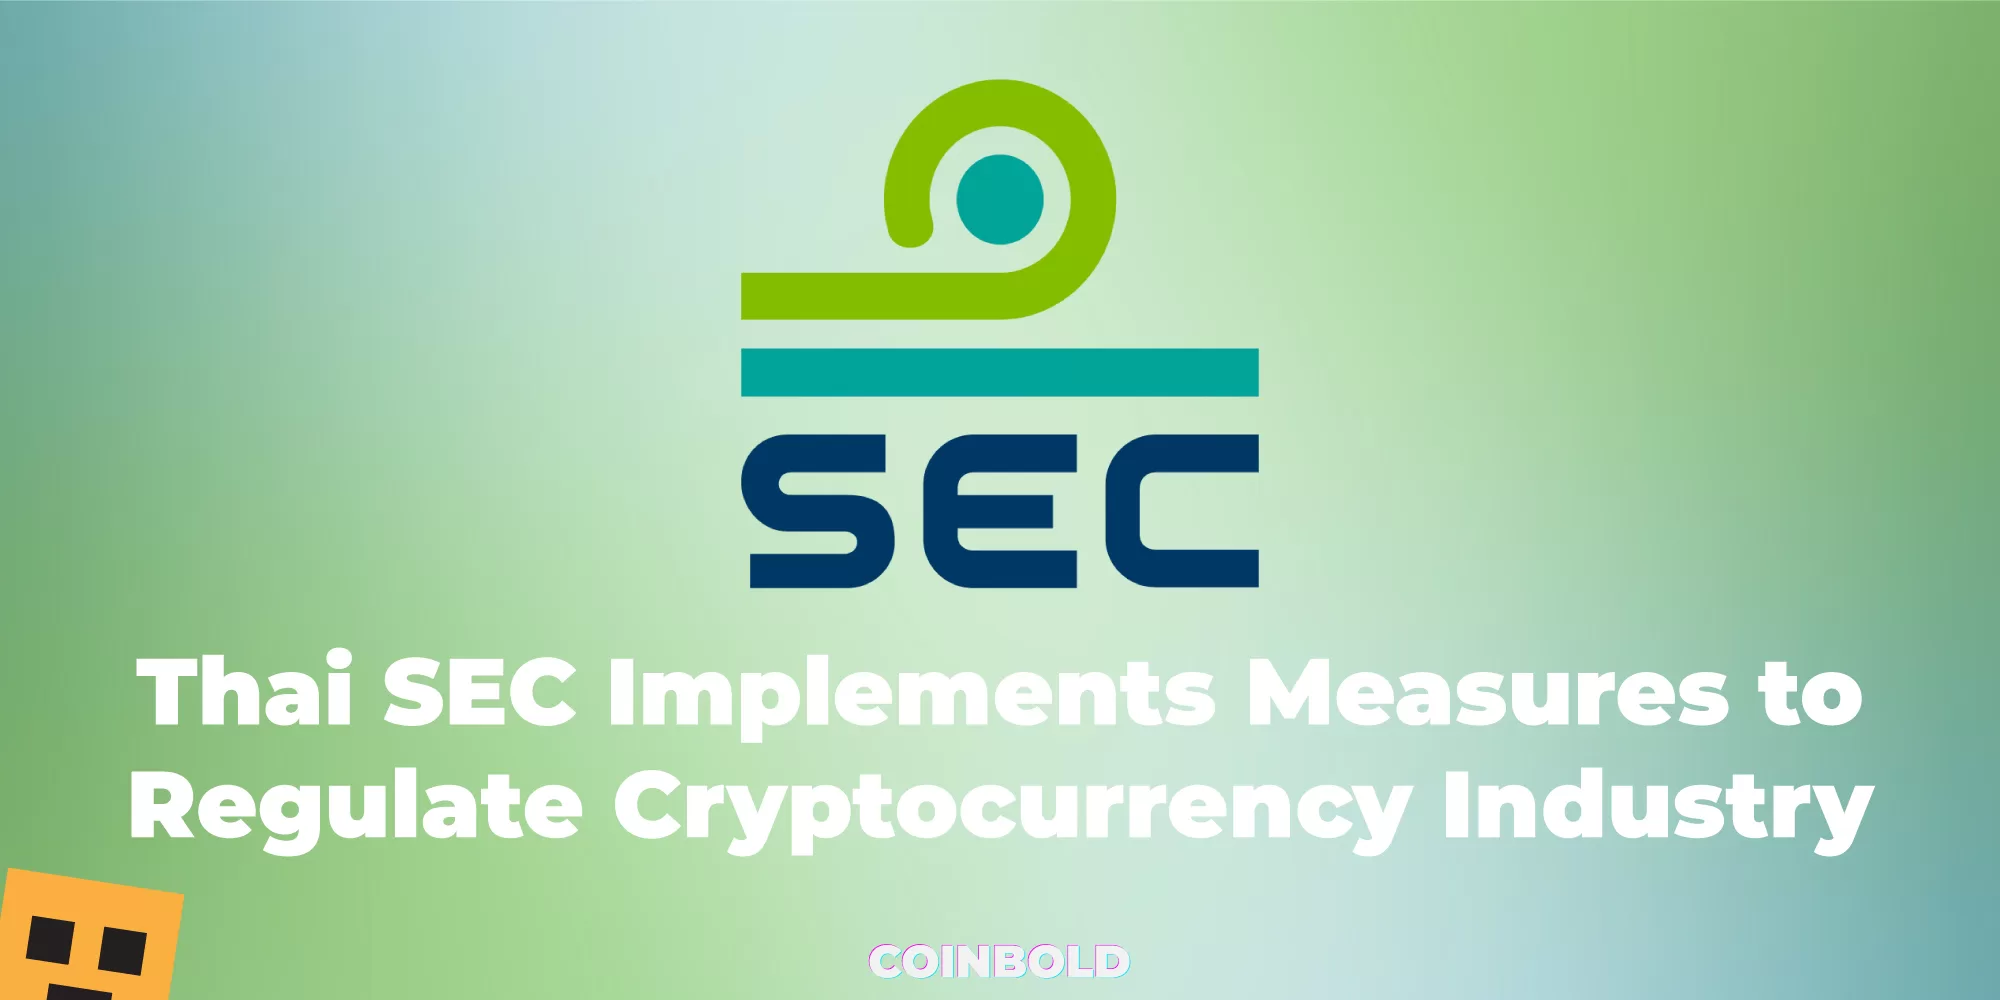 Thai SEC Implements Measures to Regulate Cryptocurrency Industry